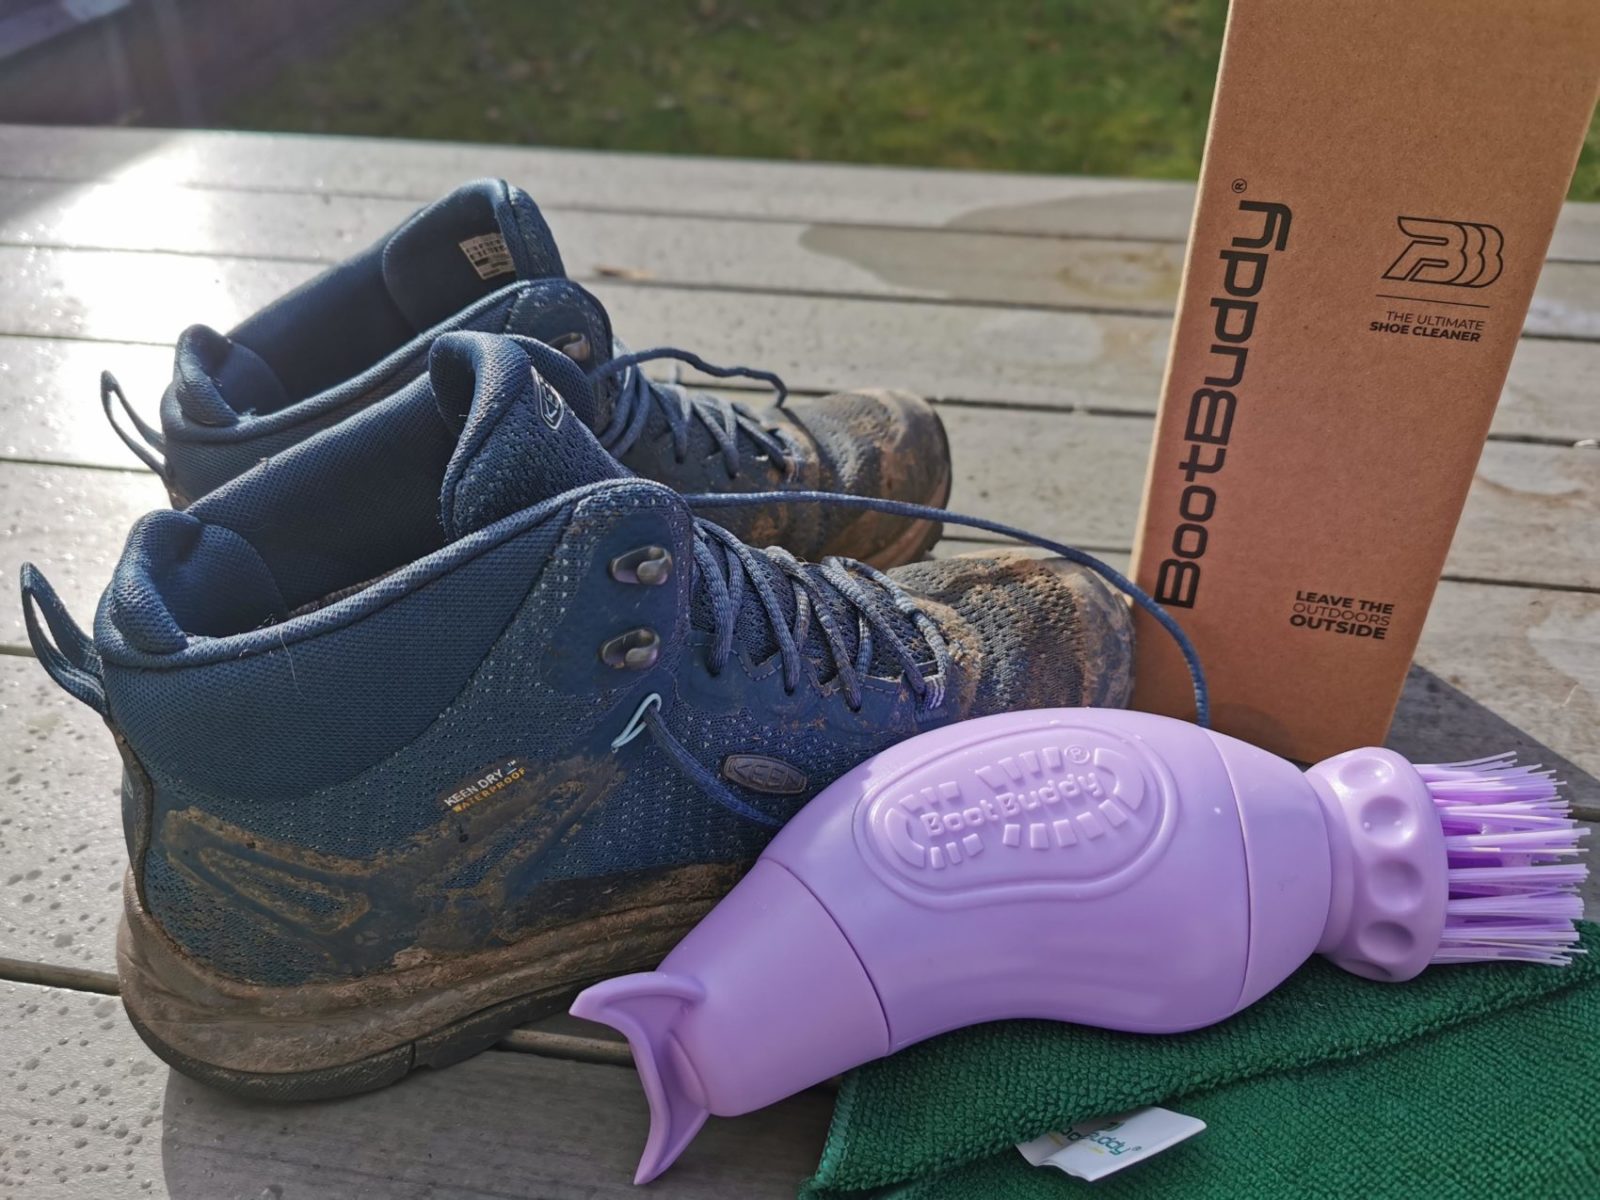 Boot Buddy Review - A Handy Must-Have For Outdoorsy Types!